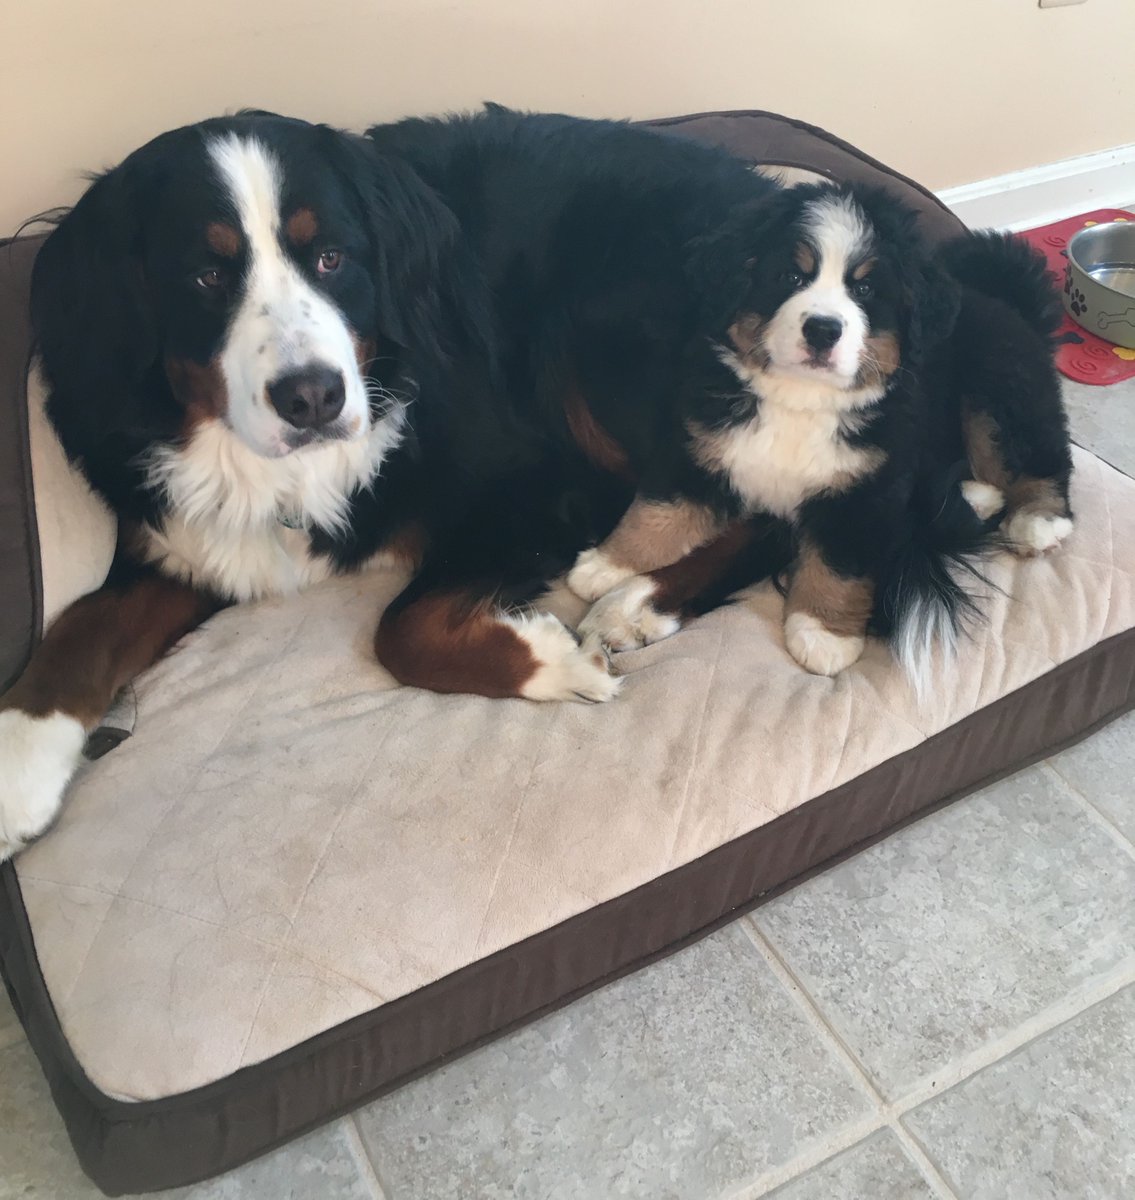 If only we could all meet our bestest friend this early in life. Way to go Nelson and Emmy Lou :-)
.
#bernesemountaindogs #bernesedaily #bernesemountaindoglovers  #dog #bernese #bmd #bernesemountaindog #berneselovecentral #berneseoftheday #berner #bernesepuppy #bernerlove